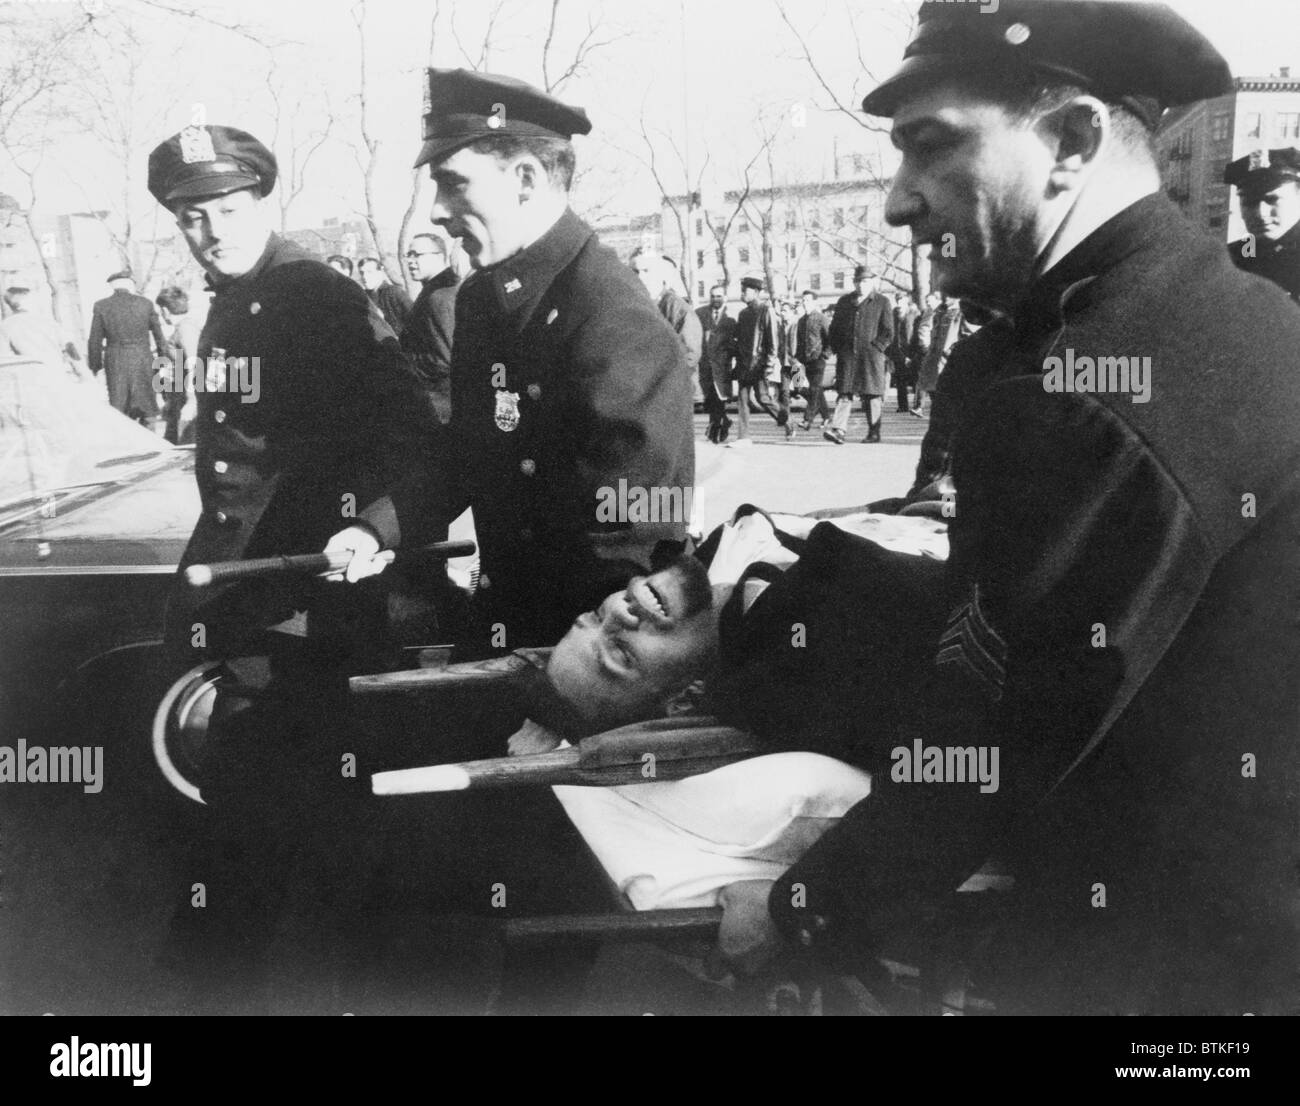 Malcolm X (1925-1965), on stretcher carried by New York policemen following his assassination at rally in a Harlem. February 21, 1965. Stock Photo